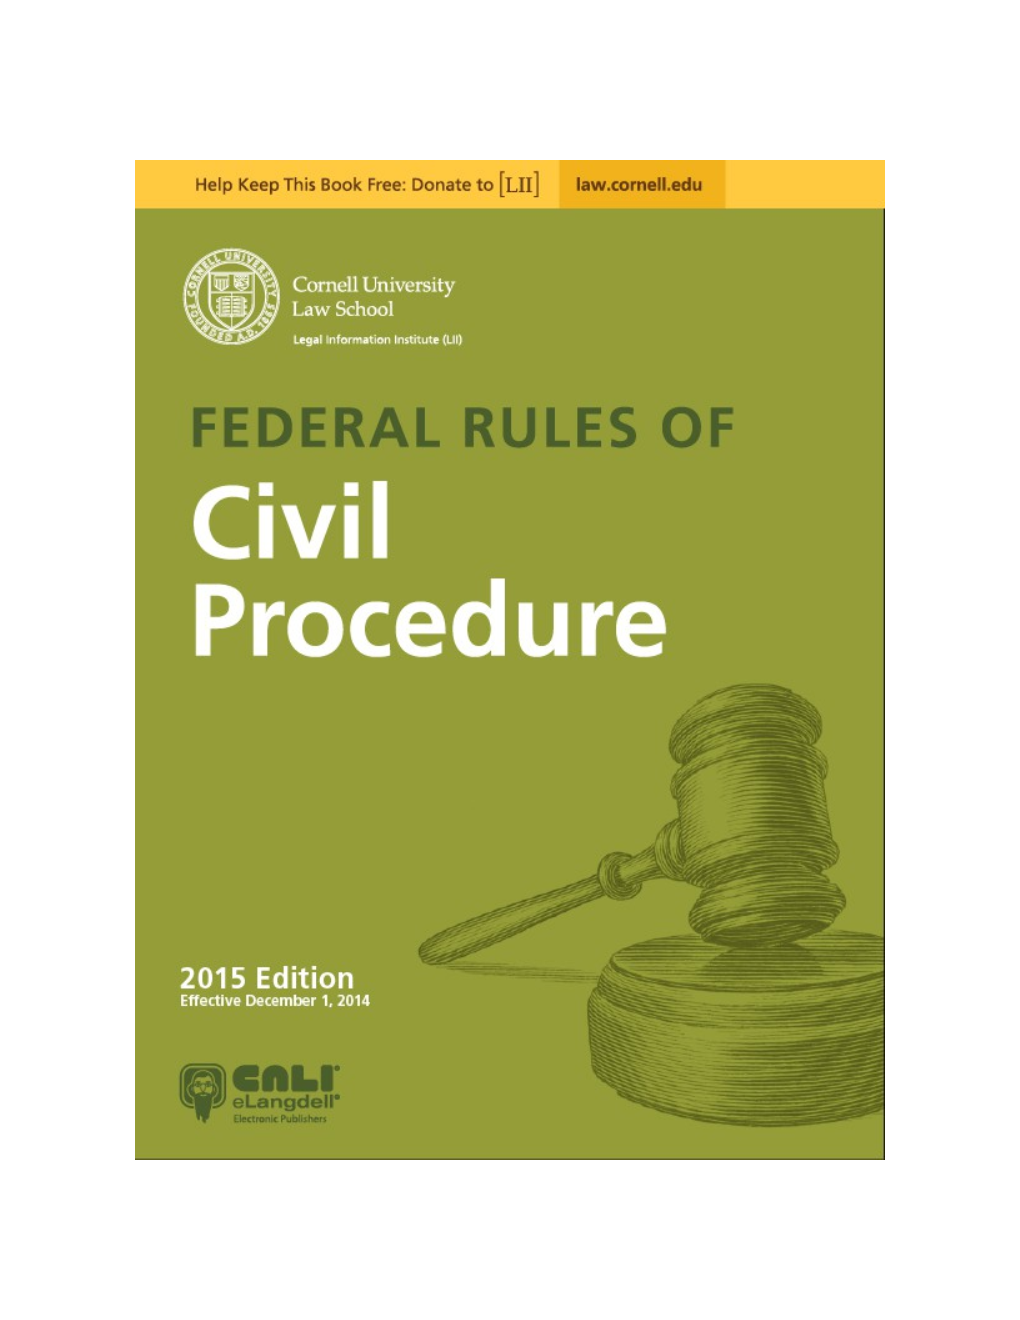 Federal Rules of Civil Procedure, 2015 Edition